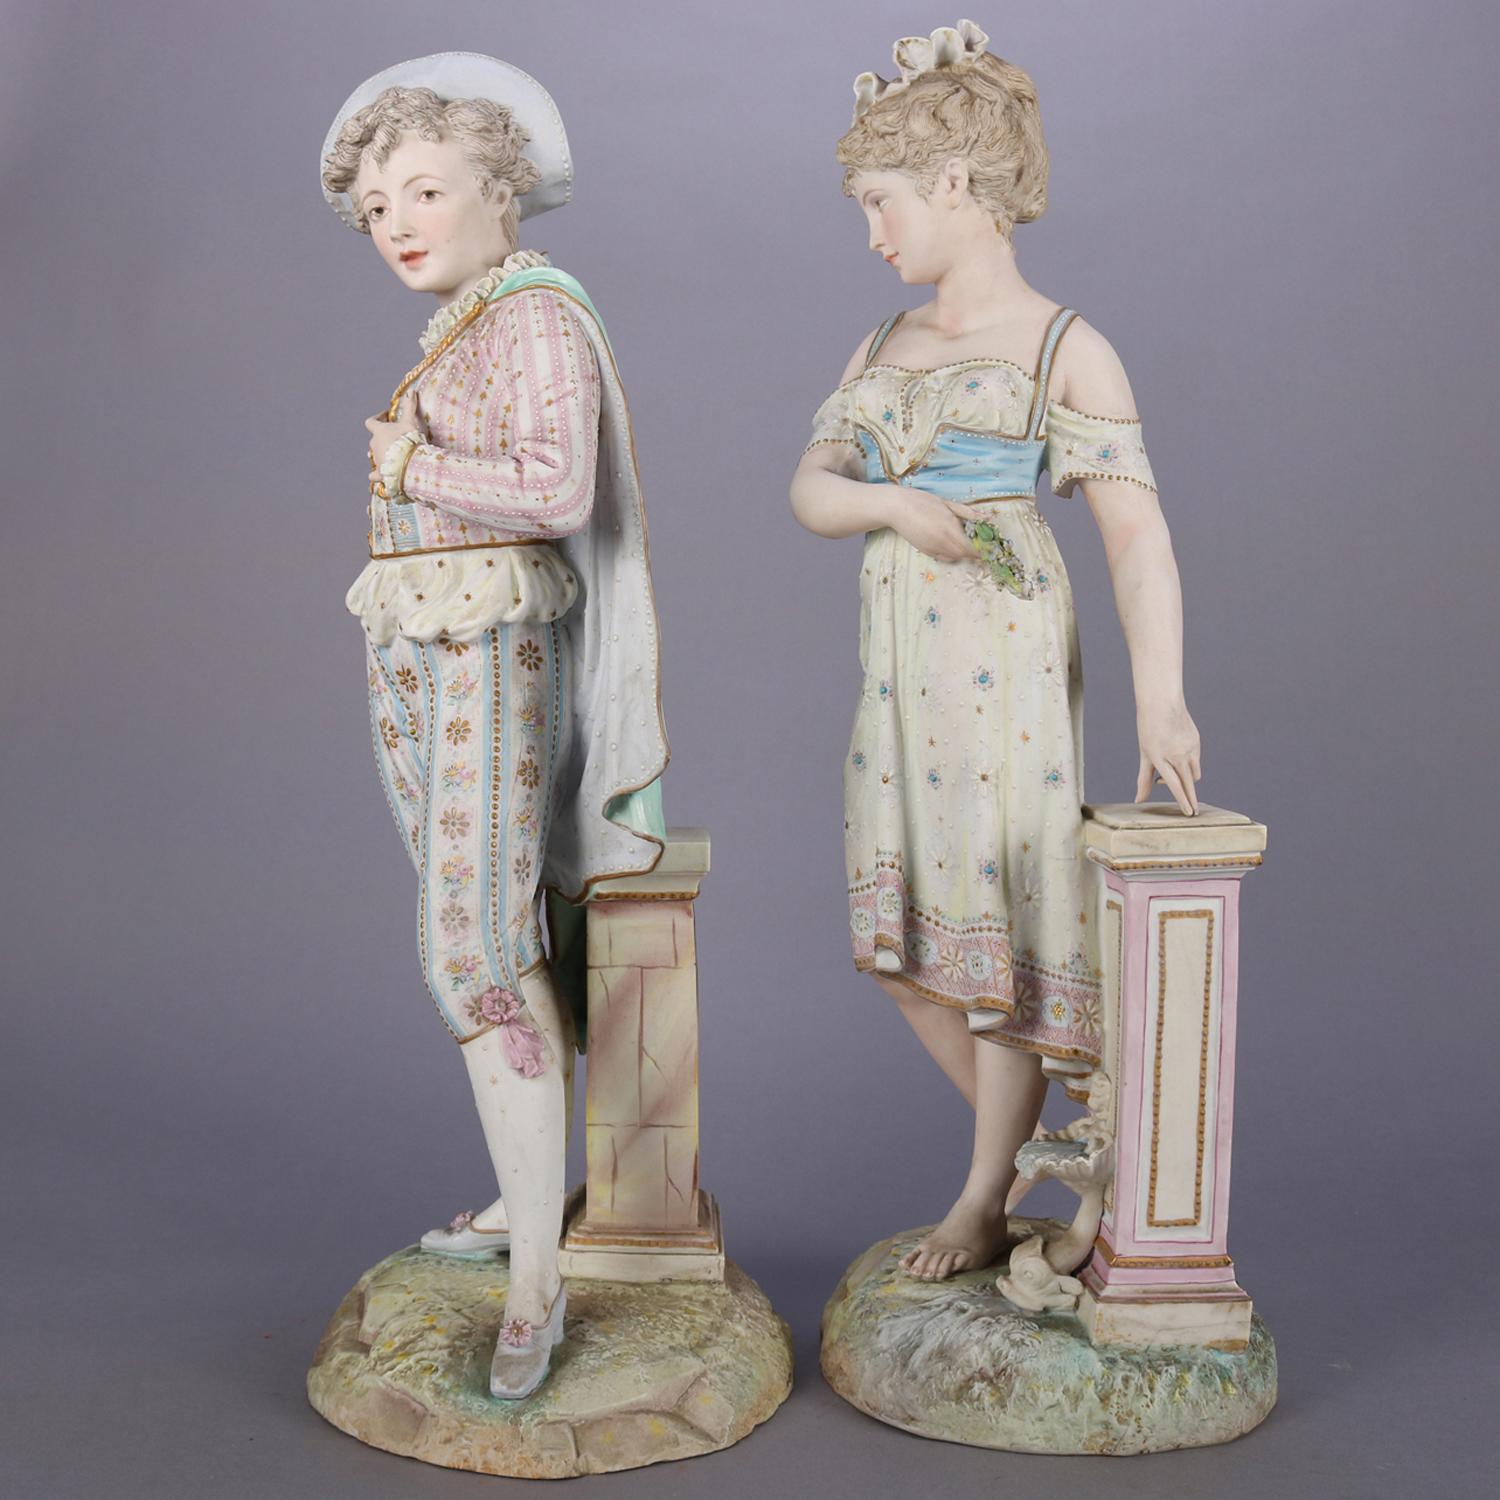 Pair of oversized English hand-painted bisque porcelain bisque figures feature courting couple in garden setting, hand-painted with gilt highlights, anchor mark on base, circa 1940.

Measures: 22